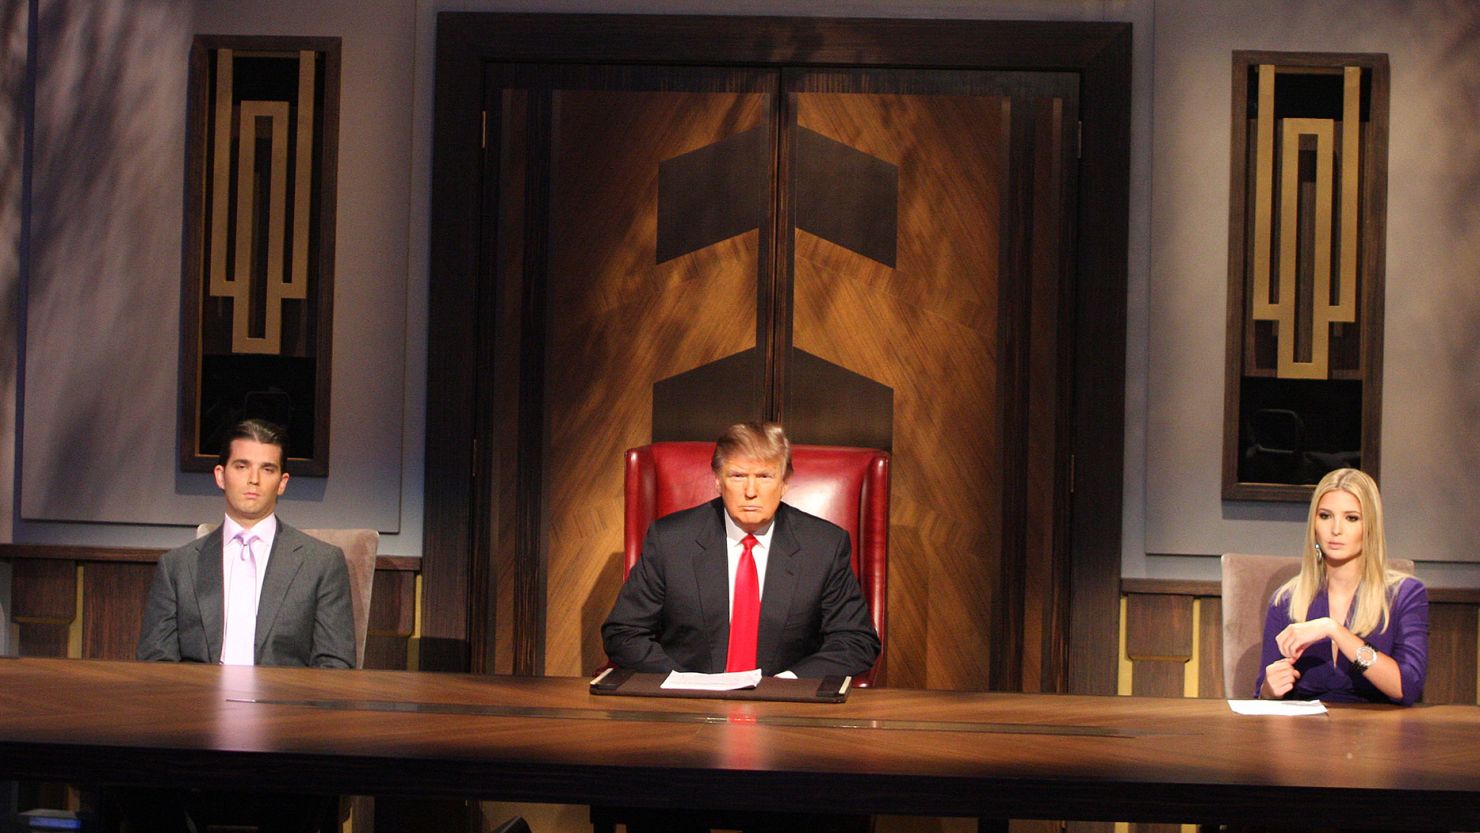 Donald Trump, center, Donald Trump Jr. and Ivanka Trump during the filming of the live final tv episode of The Celebrity Apprentice on May 10 2009 in New York City.